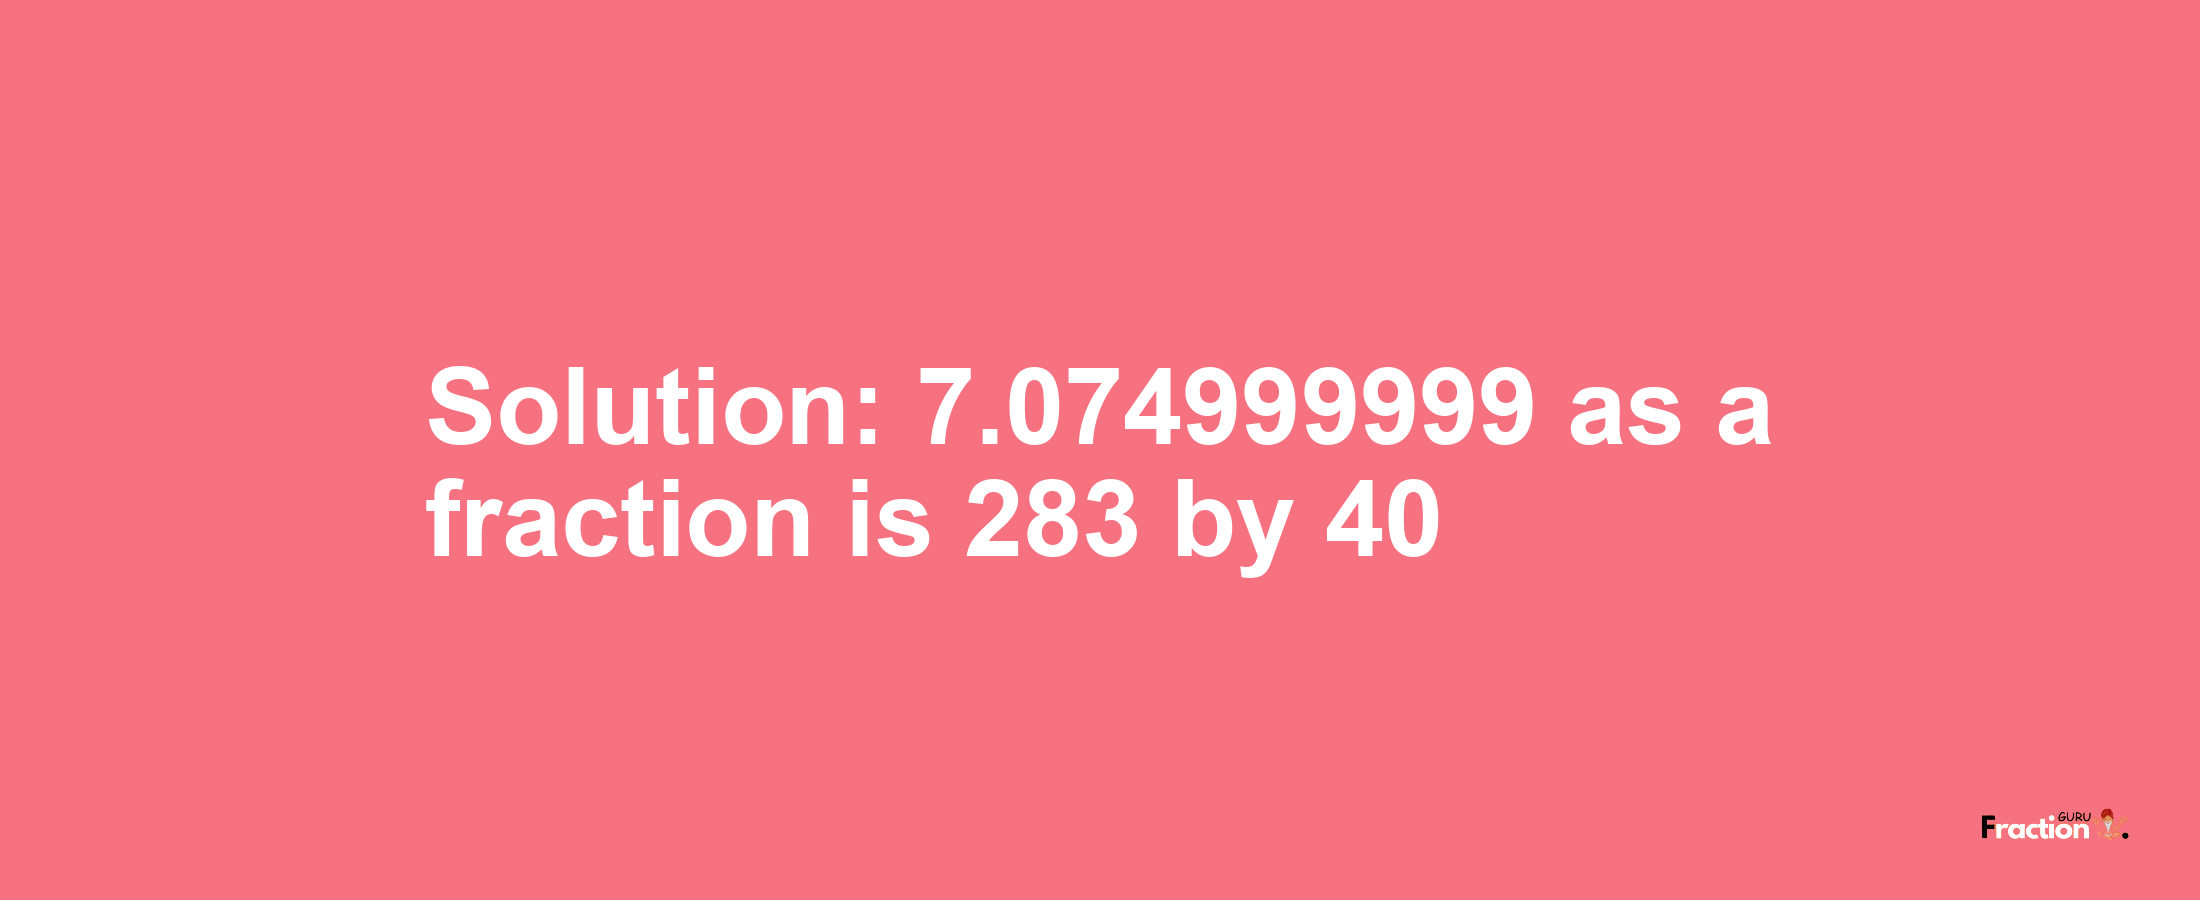 Solution:7.074999999 as a fraction is 283/40